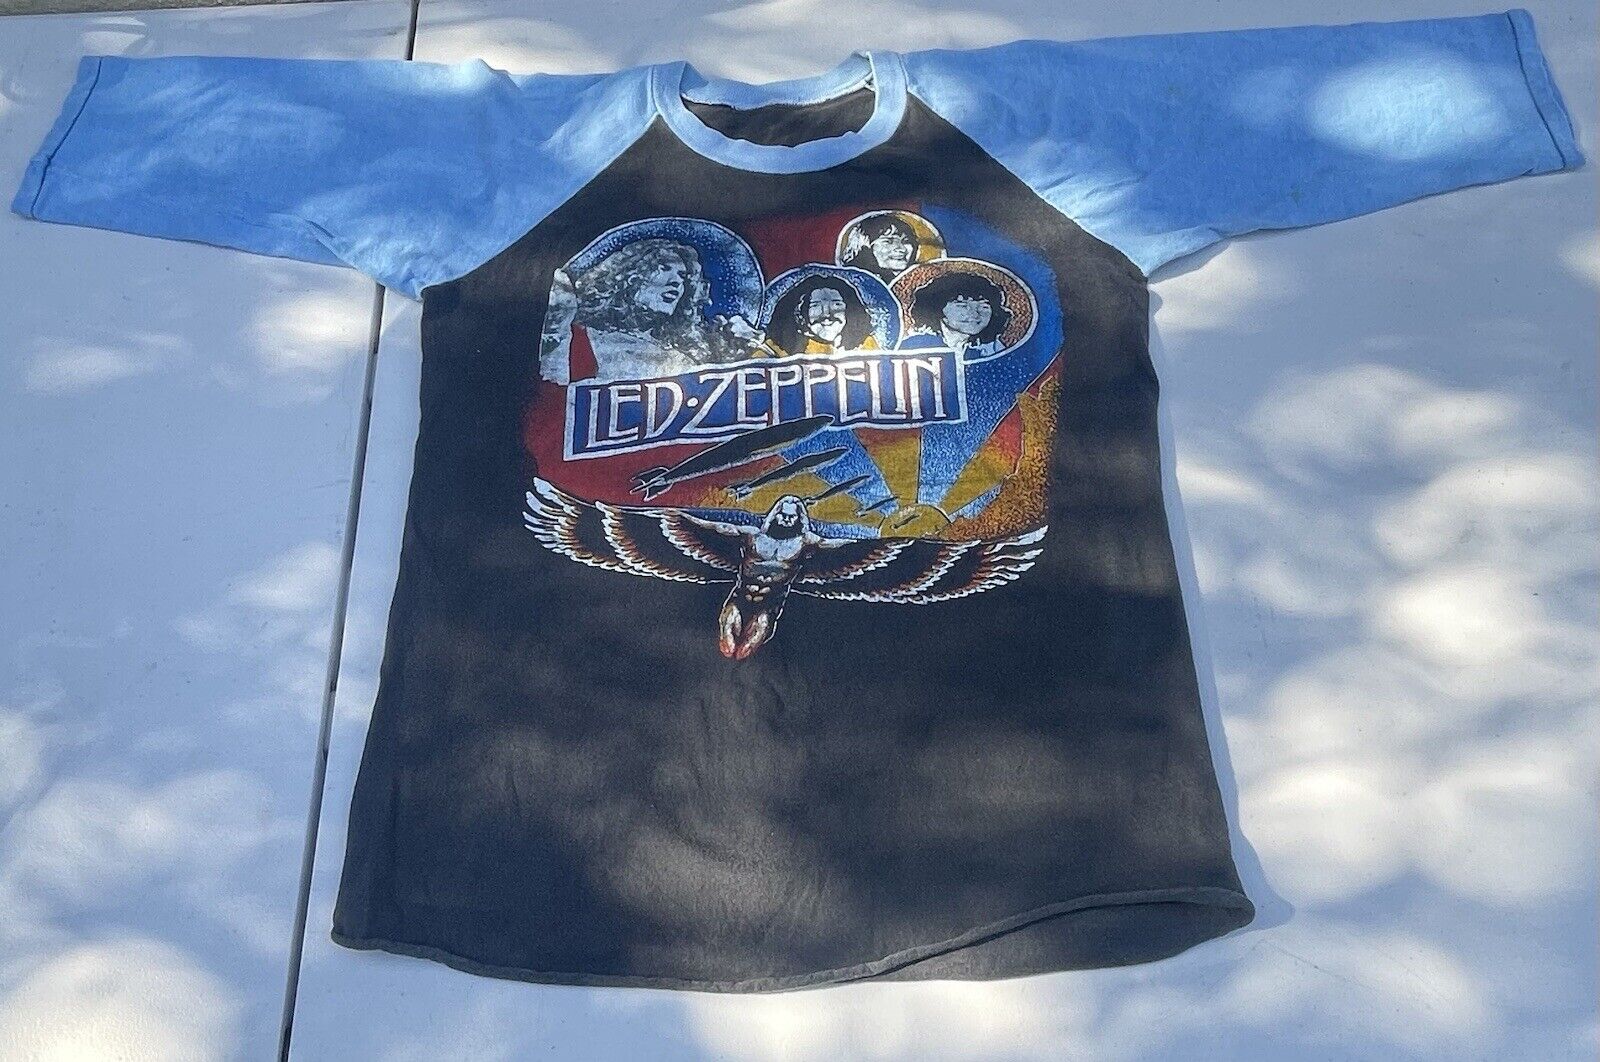 Led Zeppelin Tour 1980-1981 Shirt - Potentially Worn at an Epic Concert .